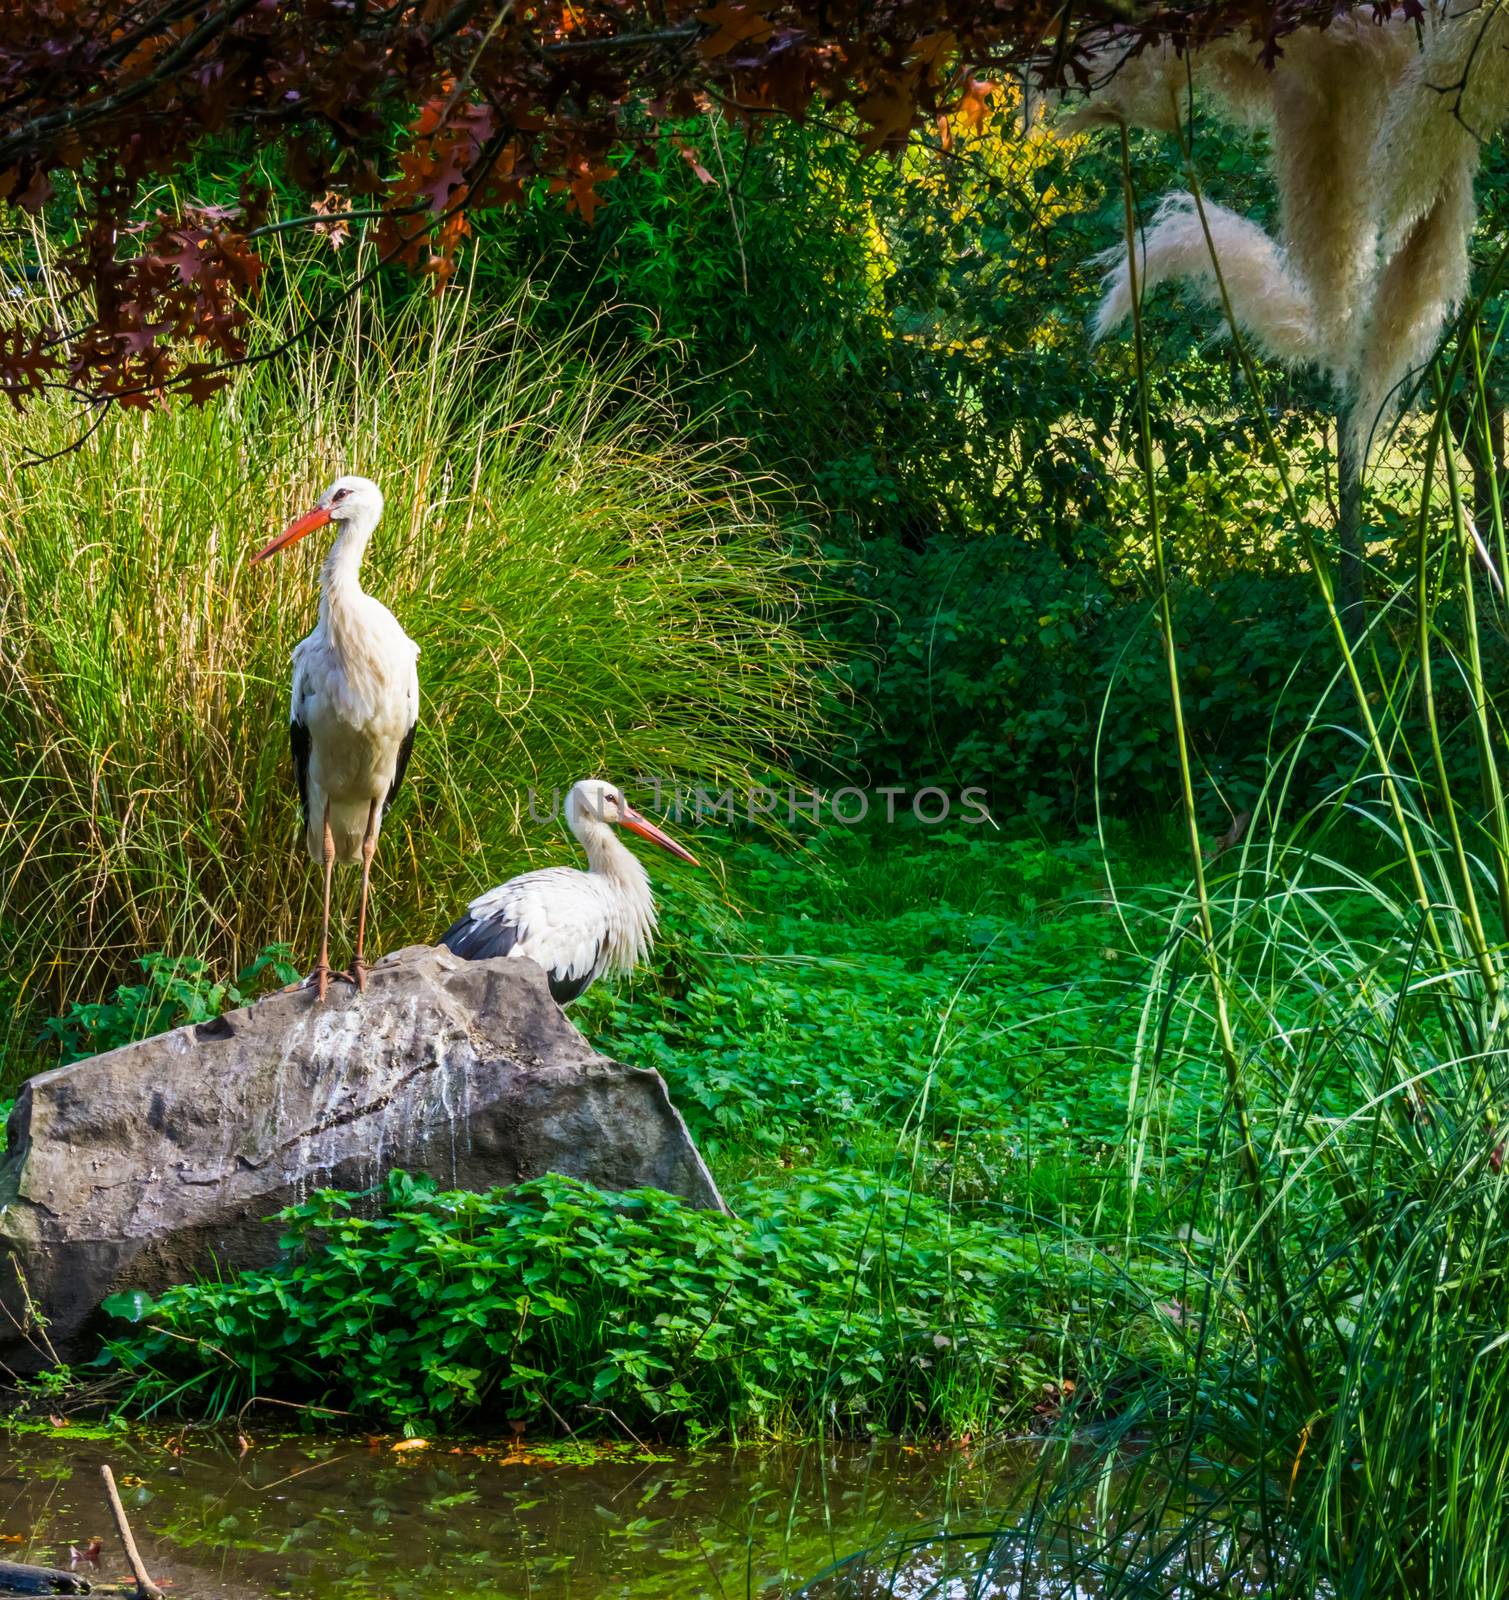 white stork standing on a rock with another stork in the background, common birds of europe